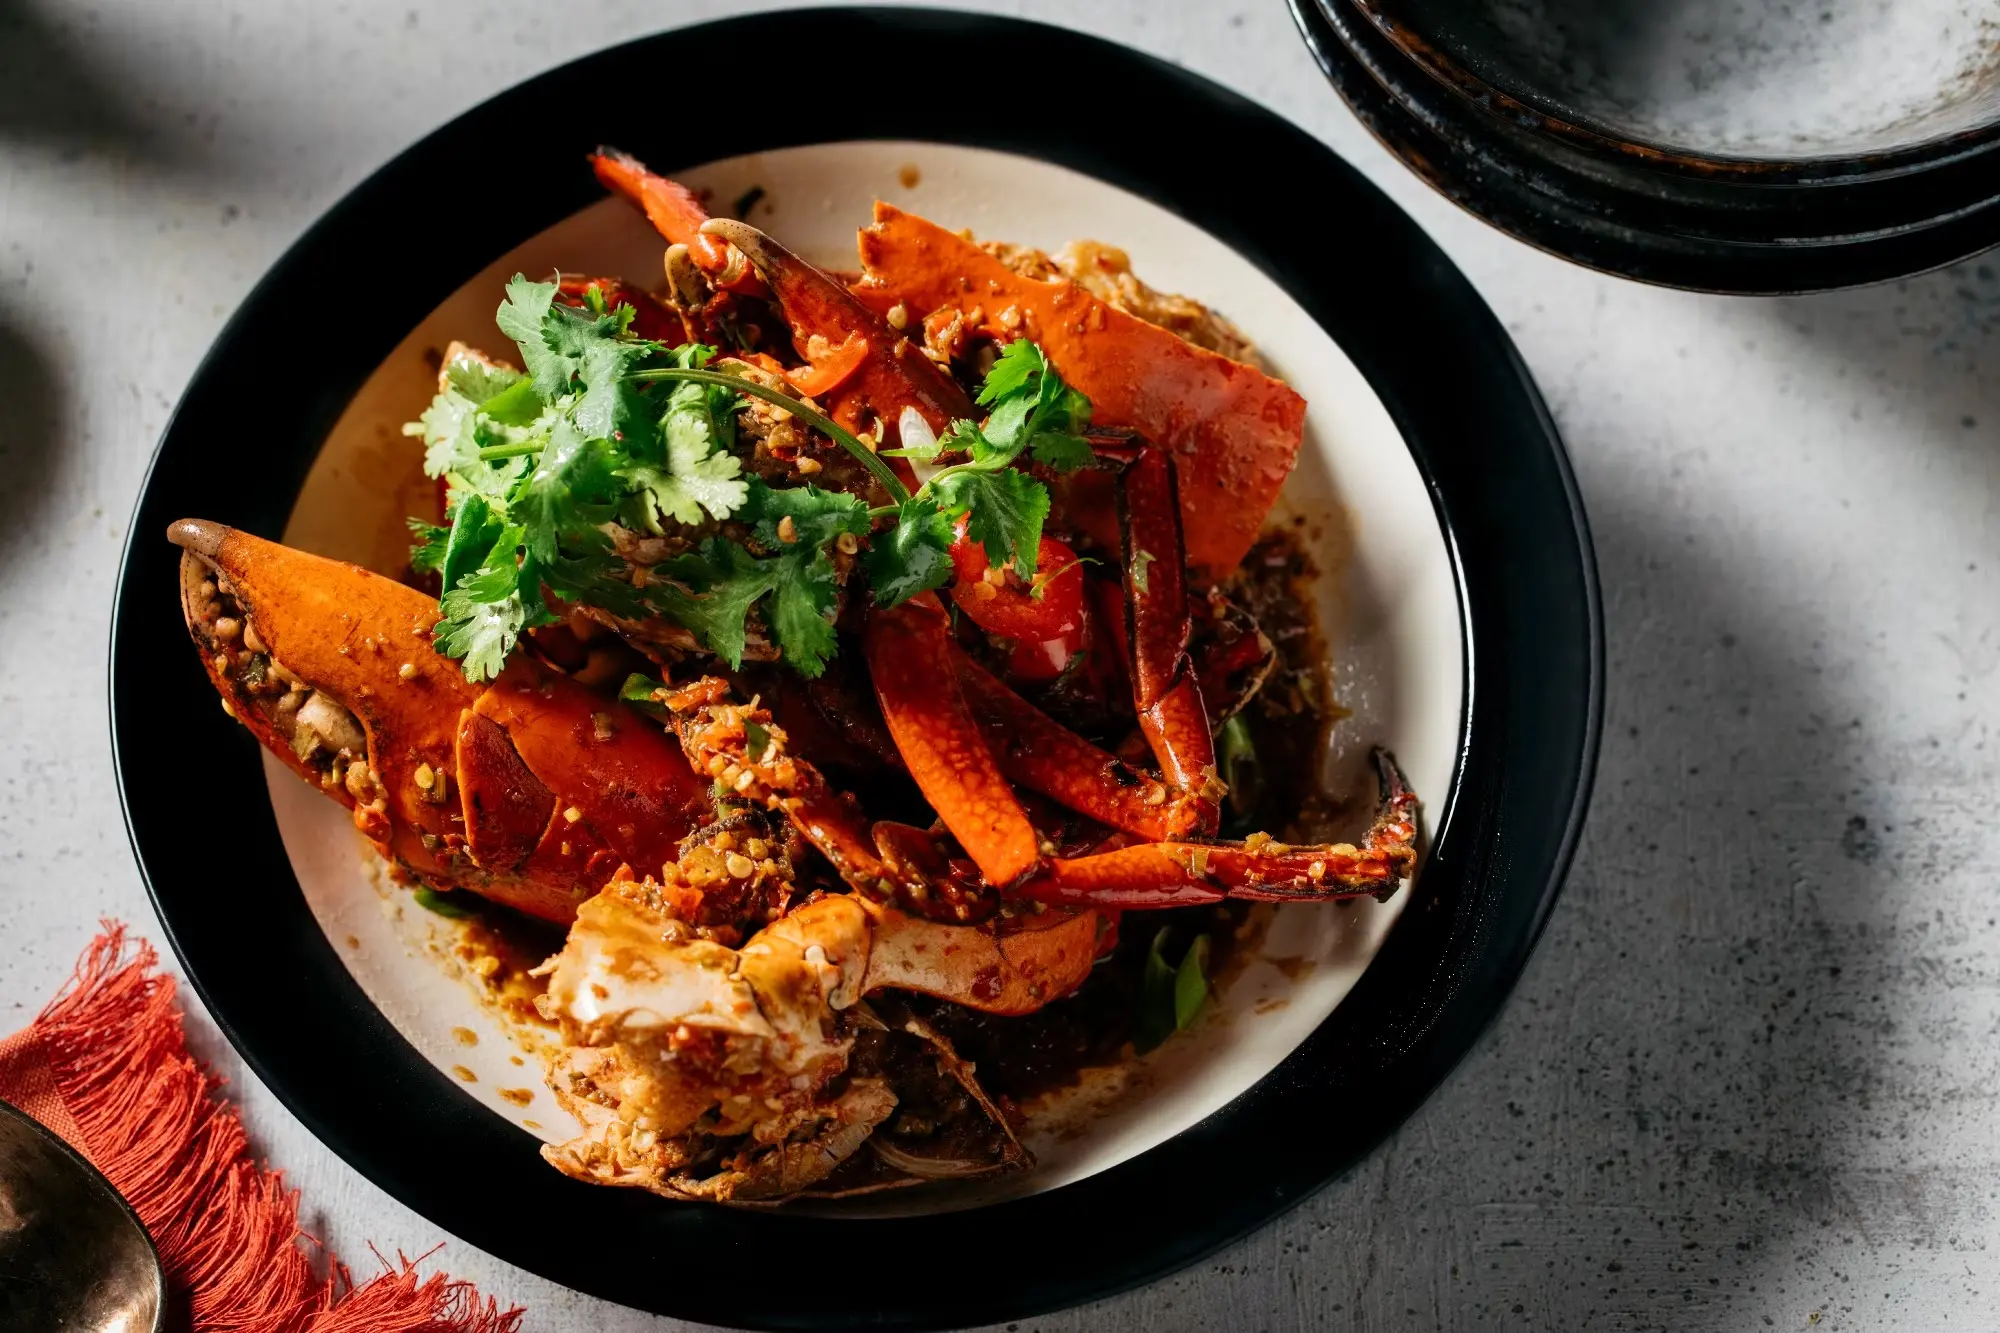 Broome chilli crab meal